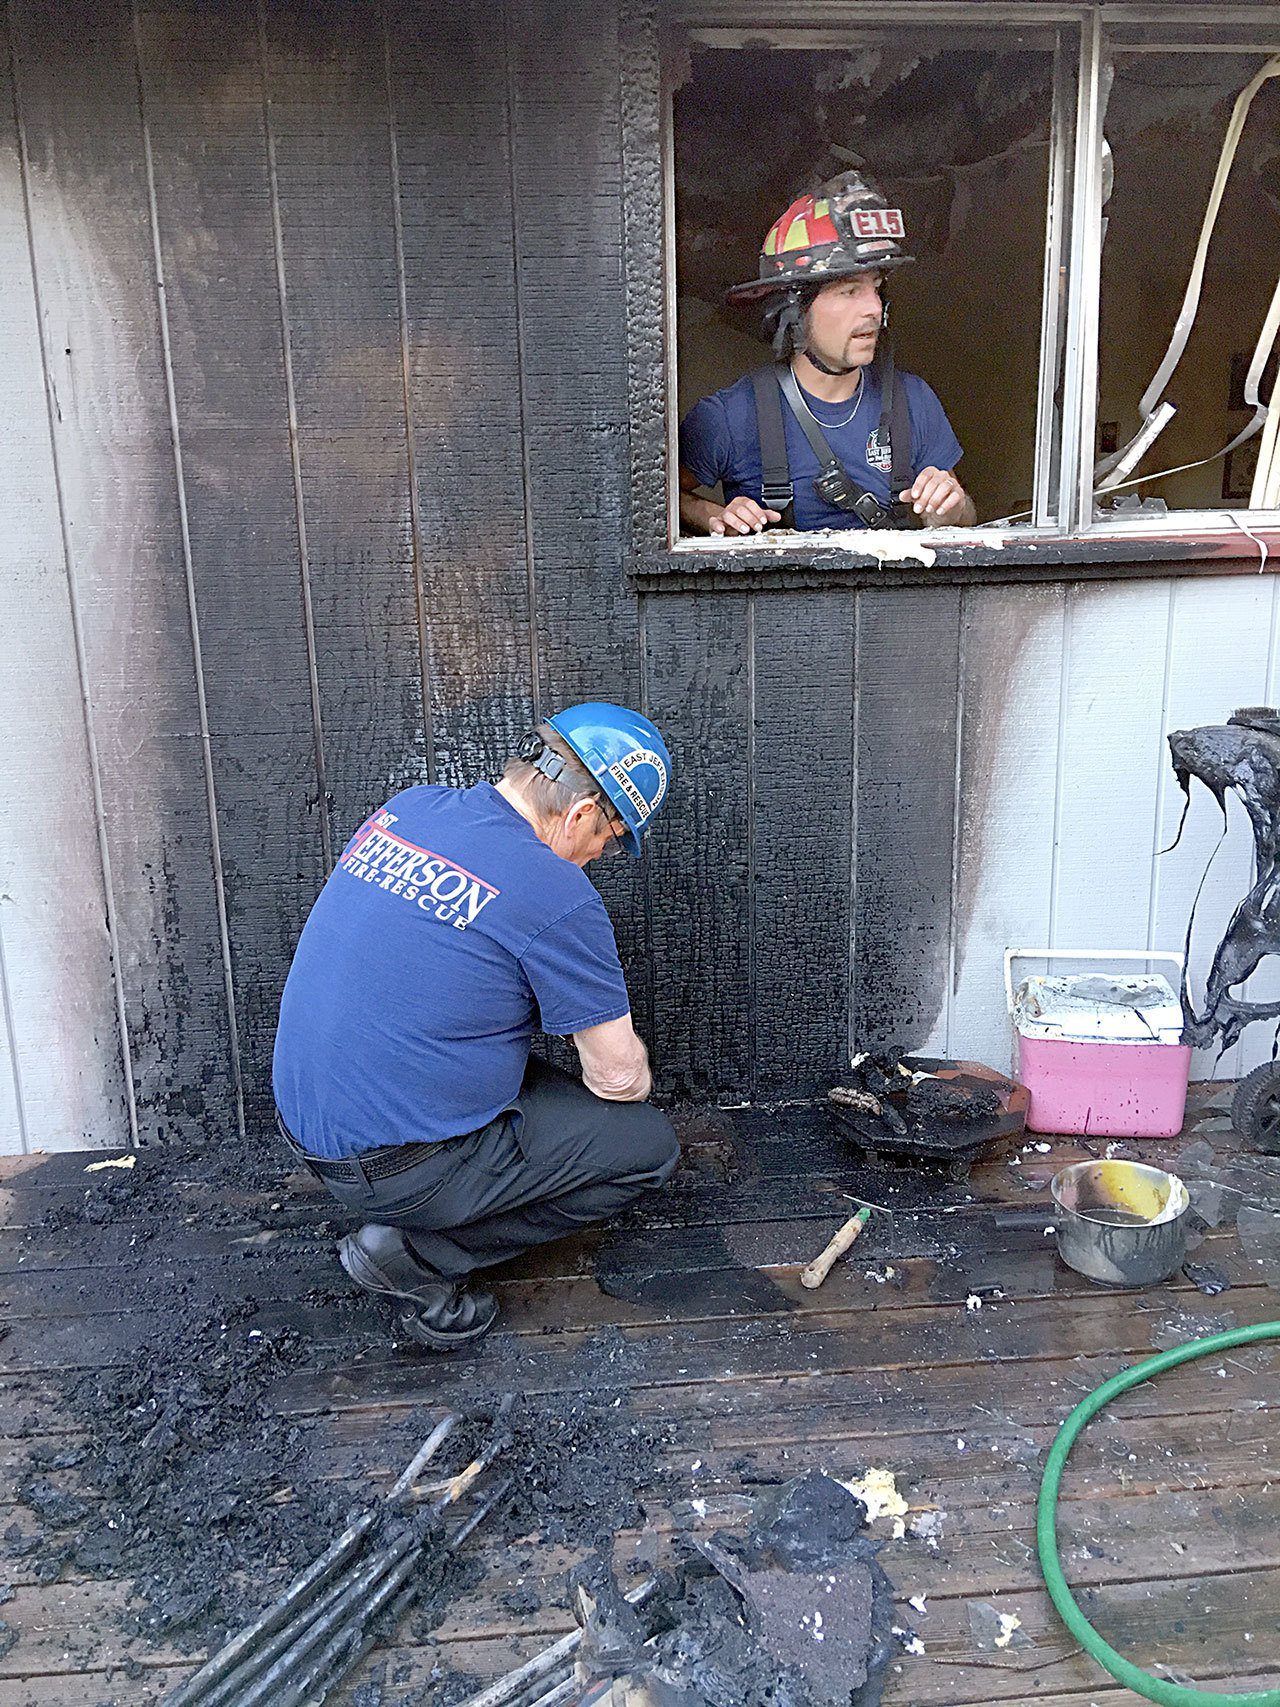 East Jefferson Fire-Rescue Assistant Chief Wayne Kier examines evidence while Lt. Steve Grimm looks on from inside the house. (East Jefferson Fire-Rescue)